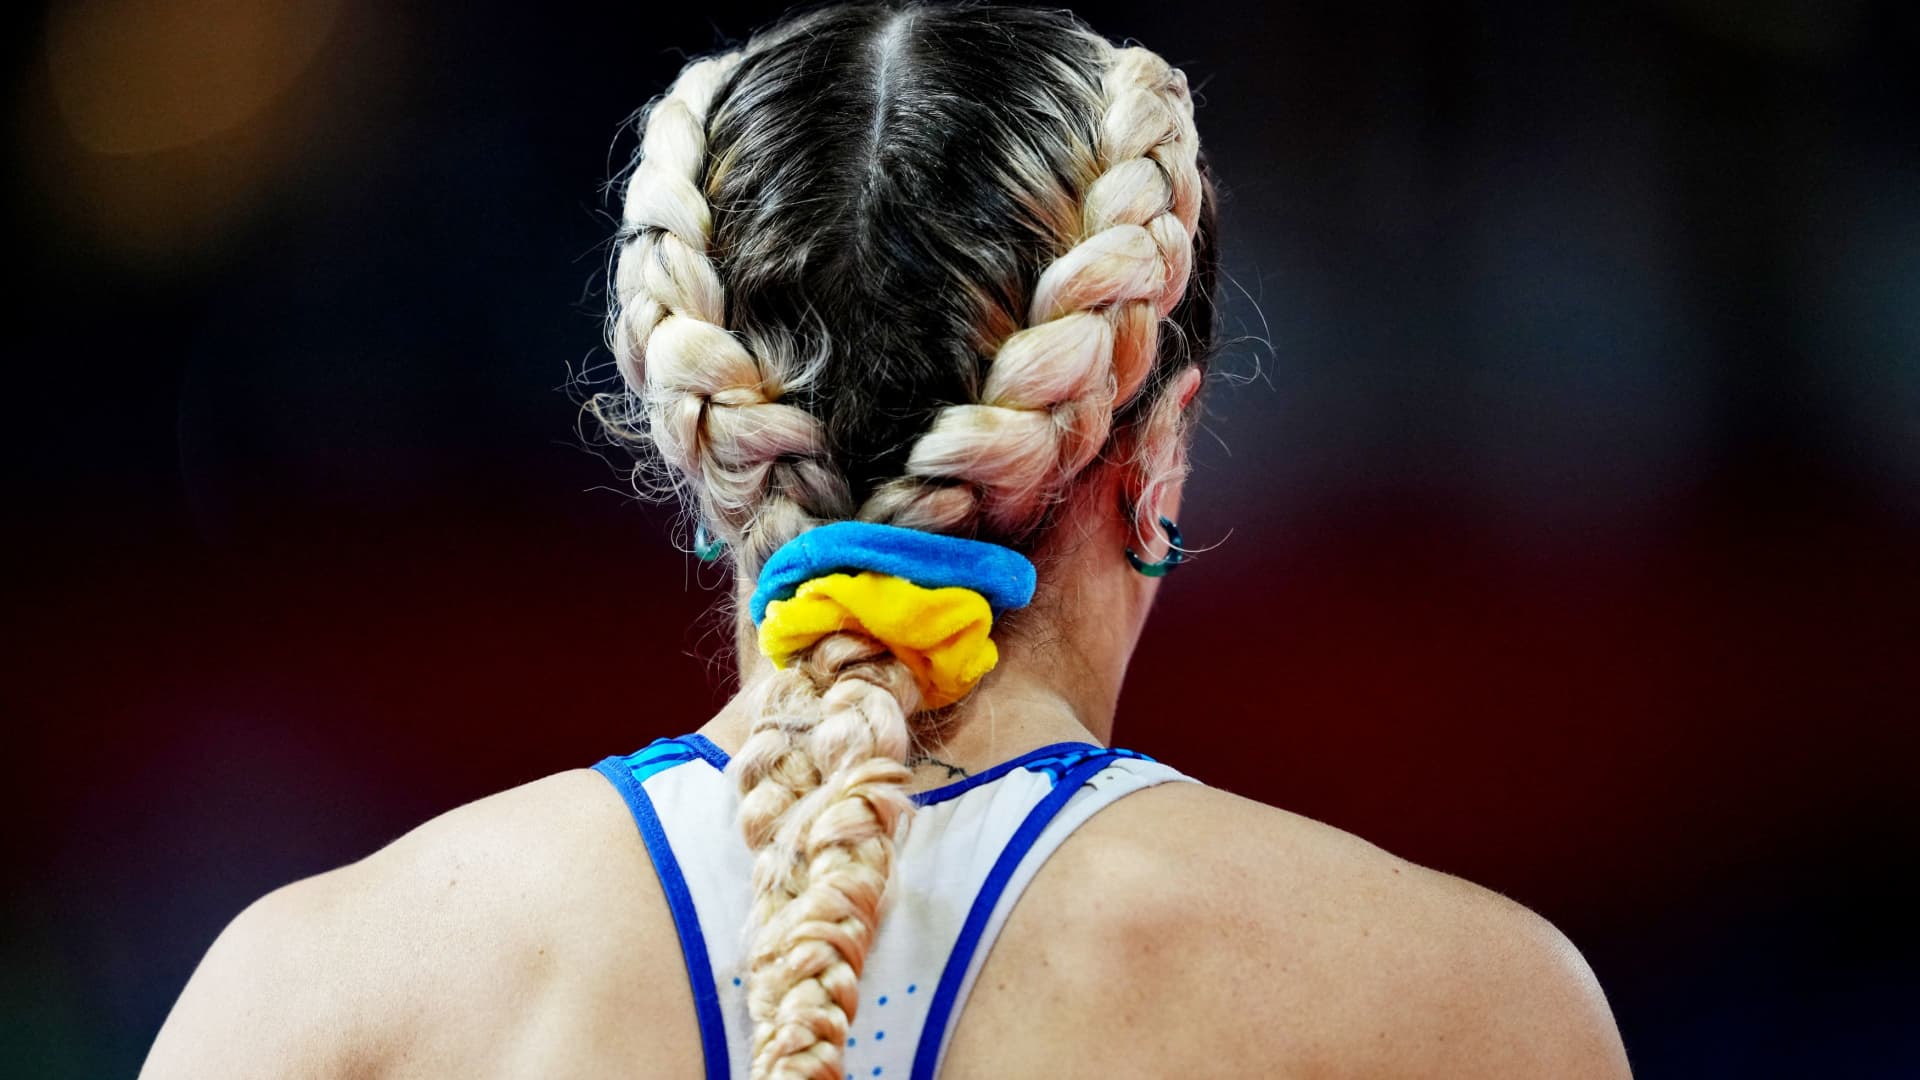 Britain's Megan Marrs wears a Ukraine hair band in support amid Russia's invasion during the women's 60 meters hurdles heat 1 .